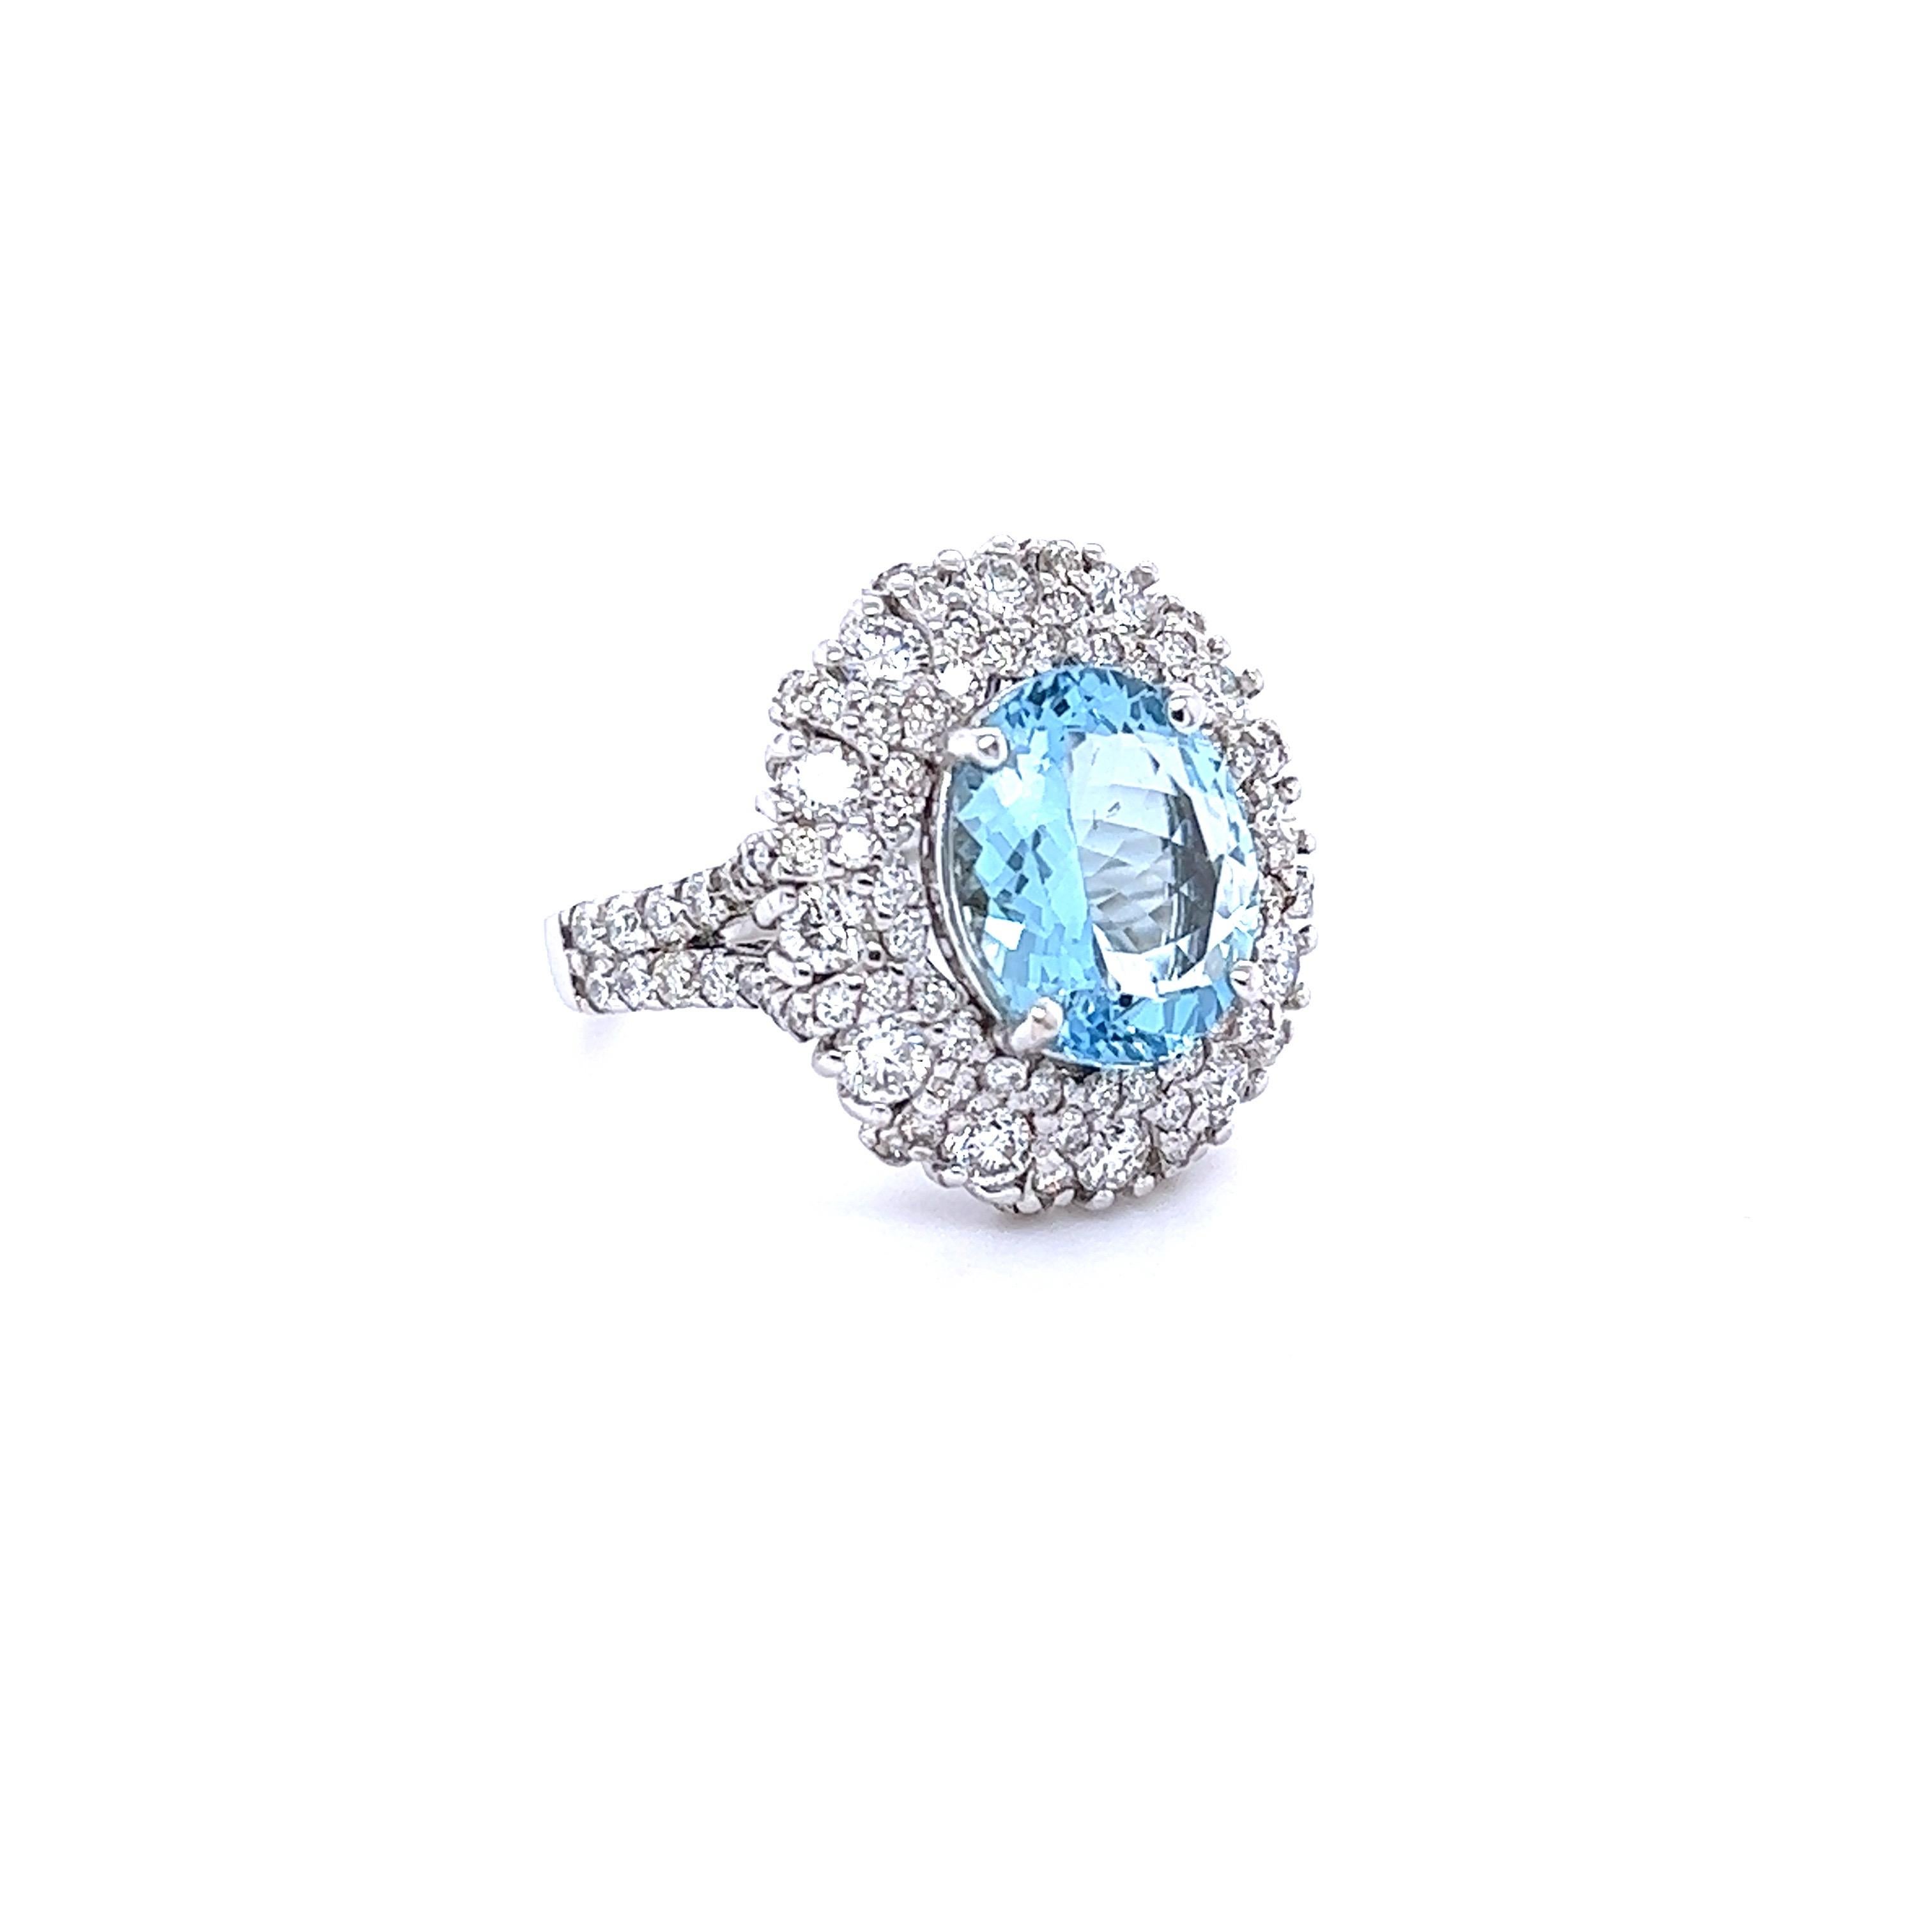 This ring has a beautiful 3.42 Carat Oval Cut Aquamarine and is surrounded by 100 Round Cut Diamonds that weigh 1.95 carat (Clarity: SI1, Color: F). The total carat weight of this ring is 5.37 carats. 
The Aquamarine is 12 mm x 10 mm and has a